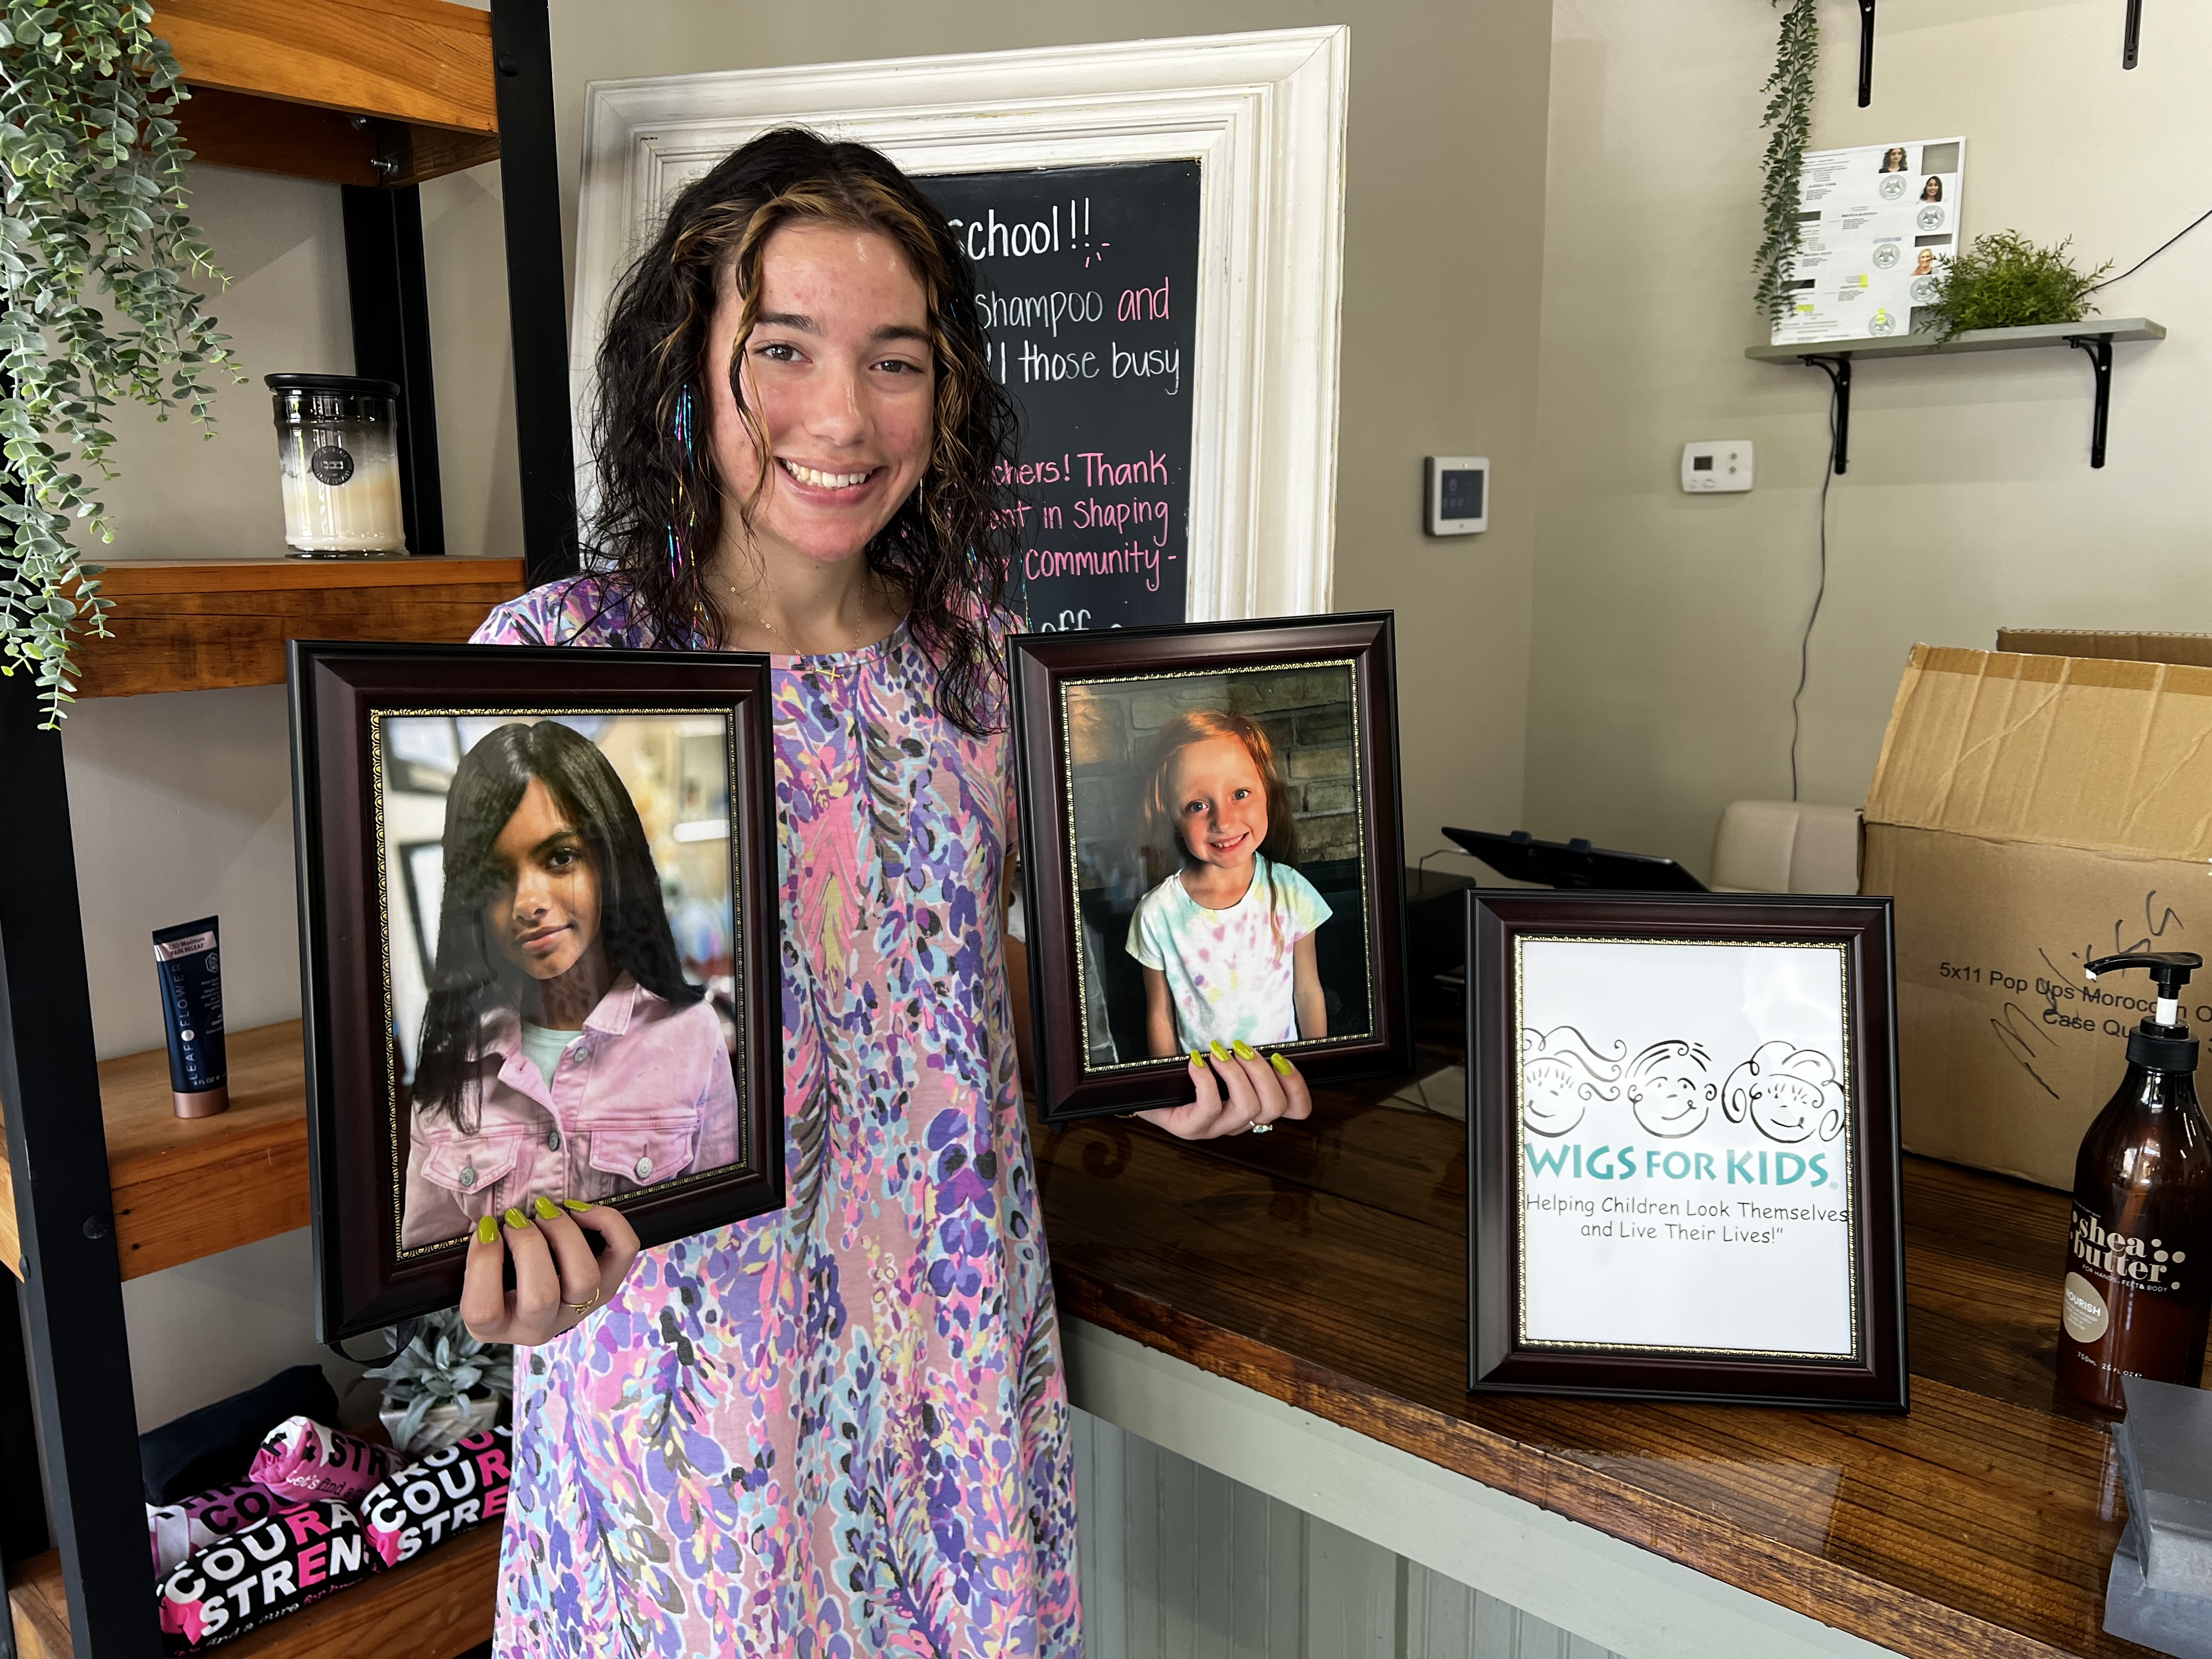 Click to read article: Davis & Co. Salon Fundraiser for Wigs for Kids'